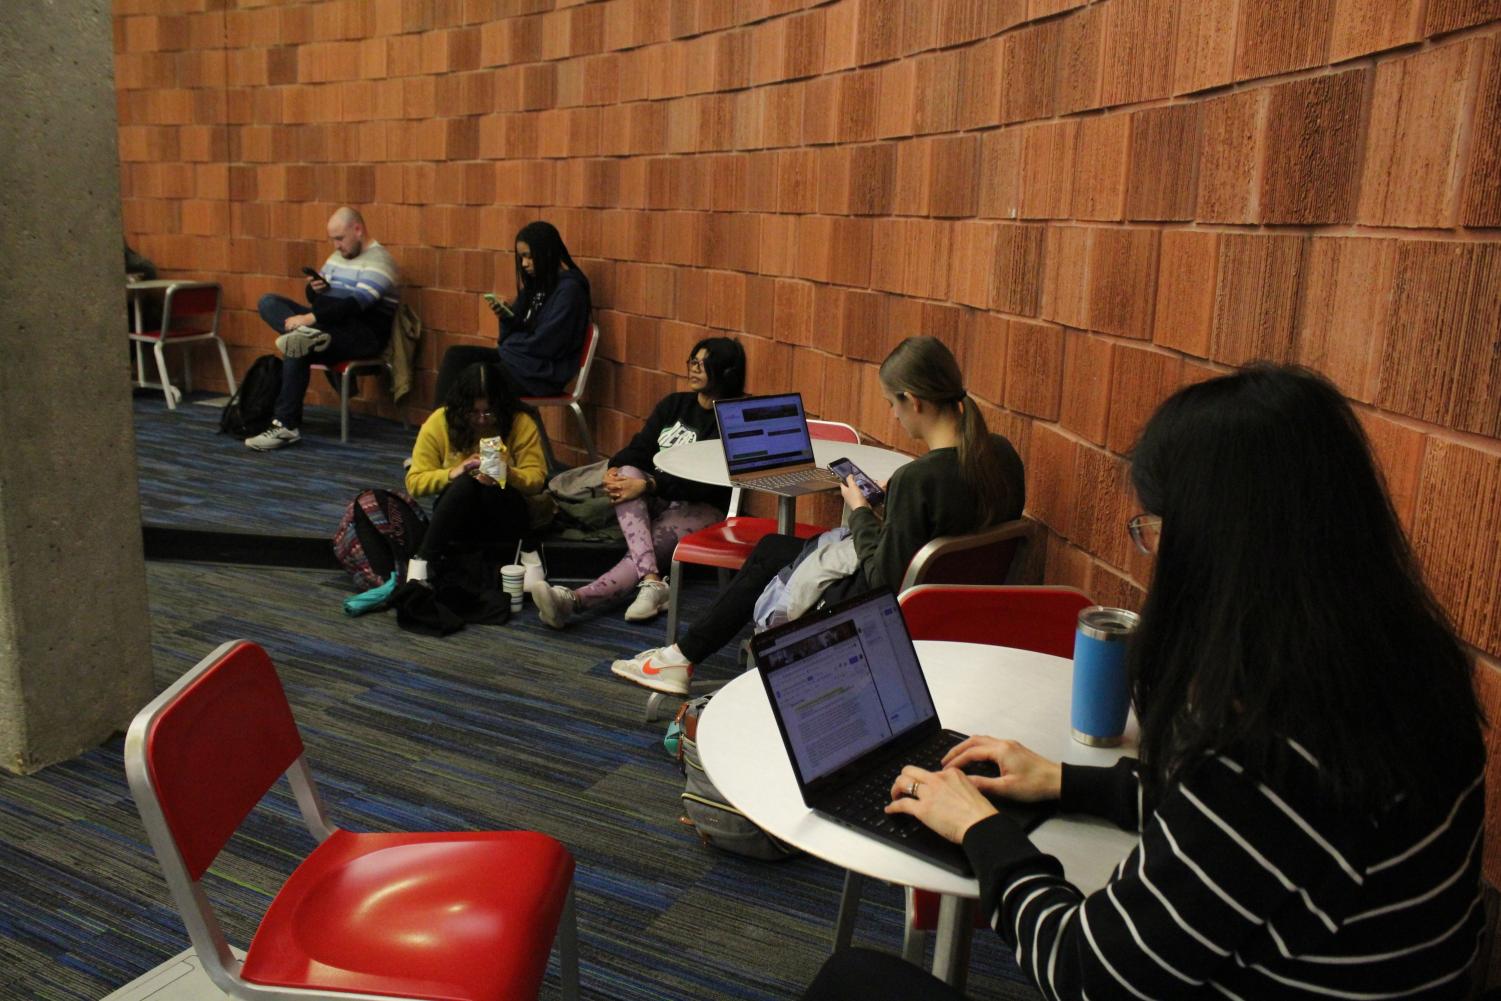 Students sit and continue to work after being evacuated around 12:25 p.m. Friday to the University Center East basement.